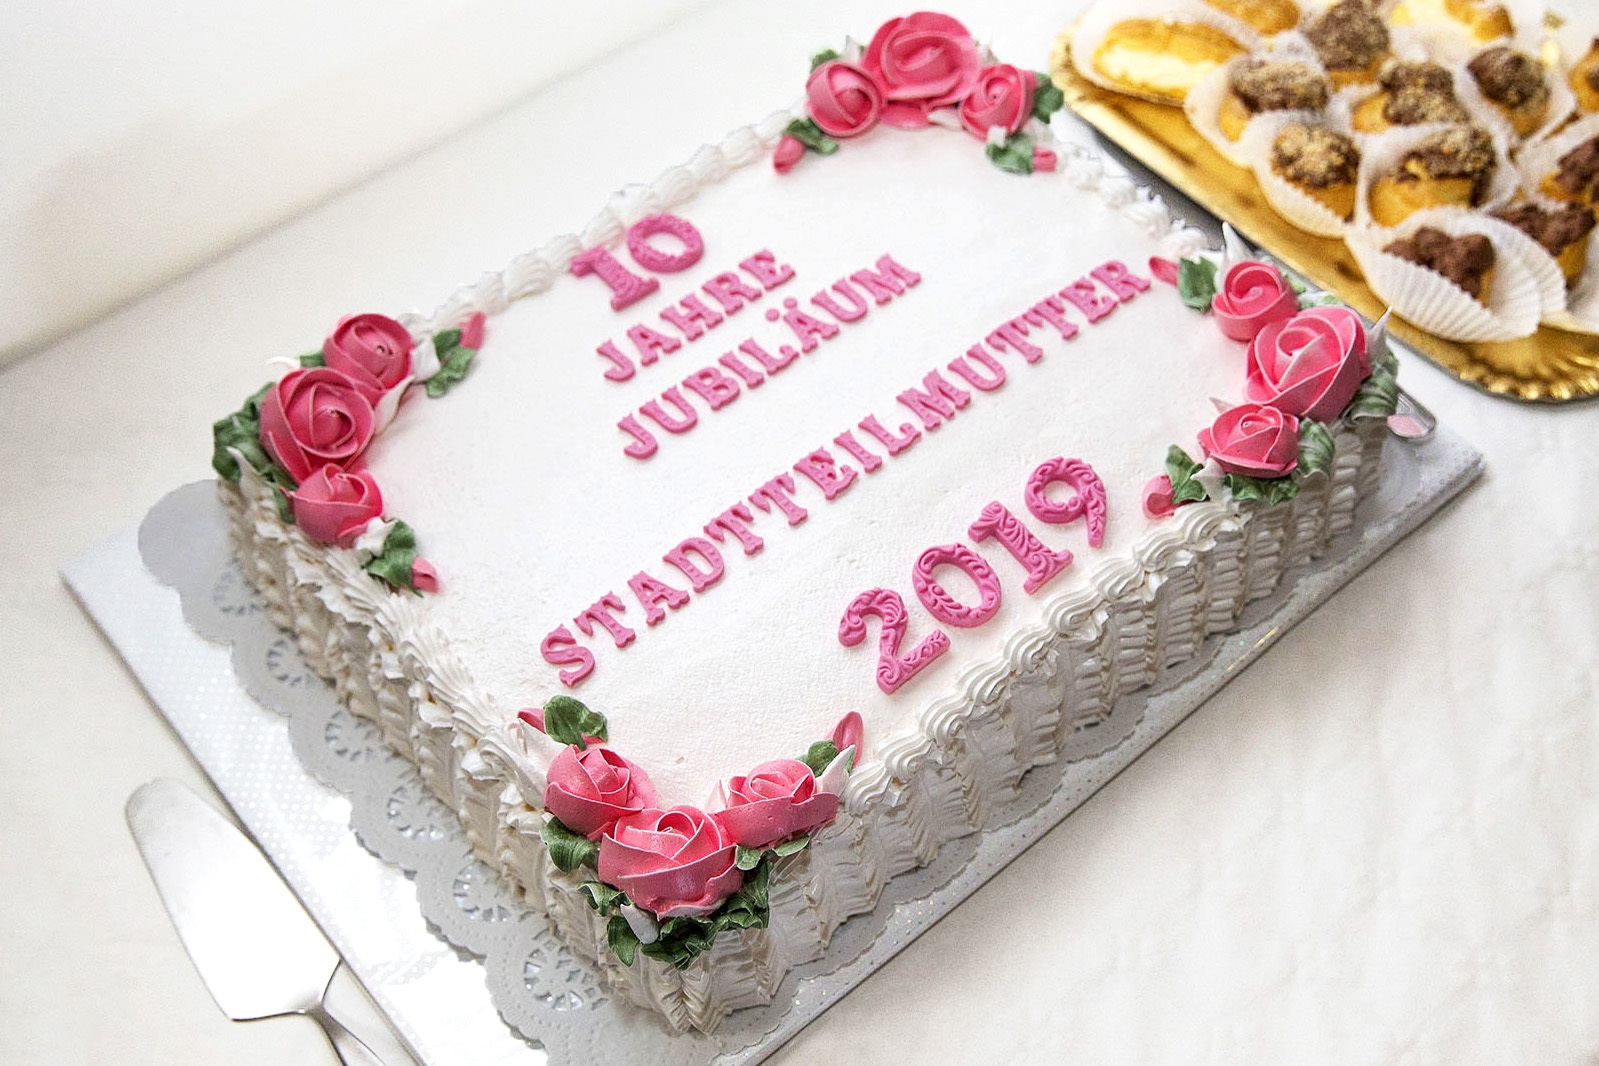 Anniversary cake "10 years of district mothers 